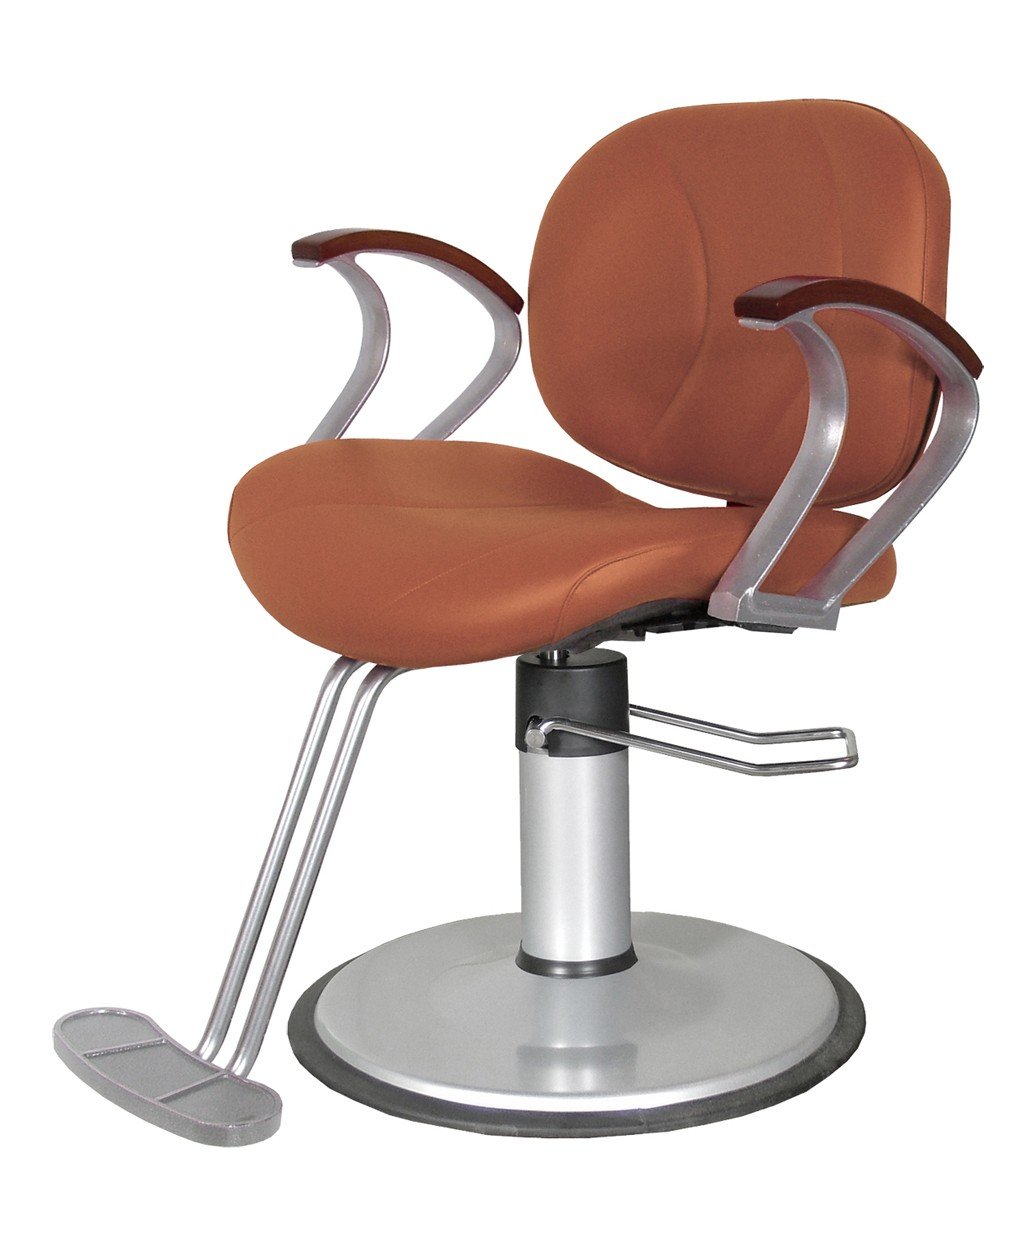 Collins 5500 Belize Styling Chair